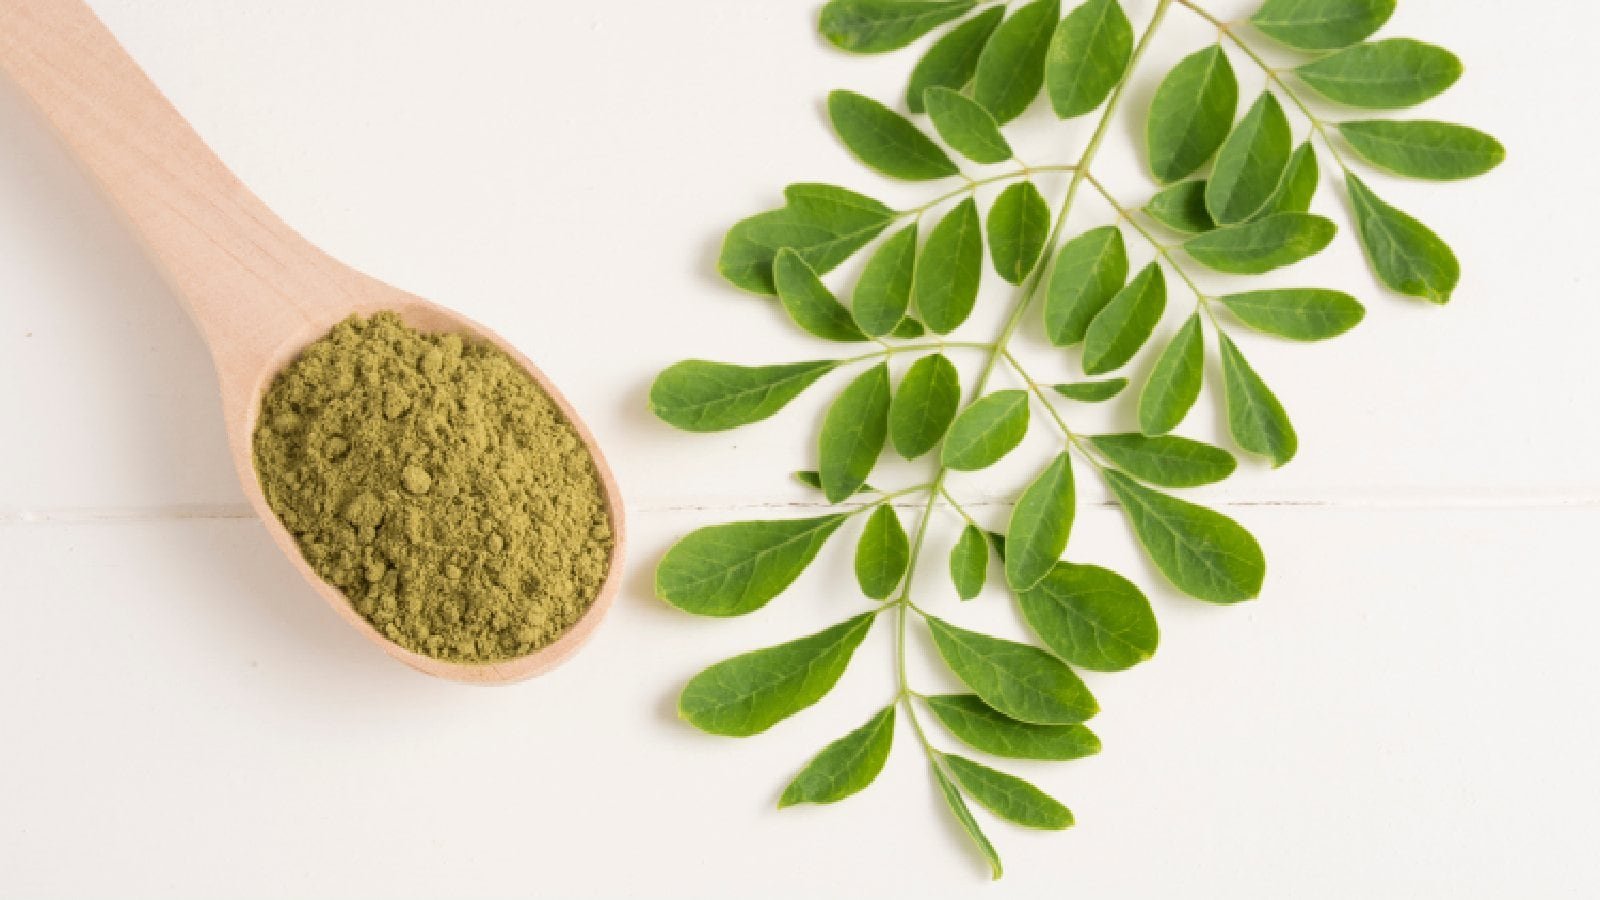 Moringa for weight loss How drumsticks help you lose weight